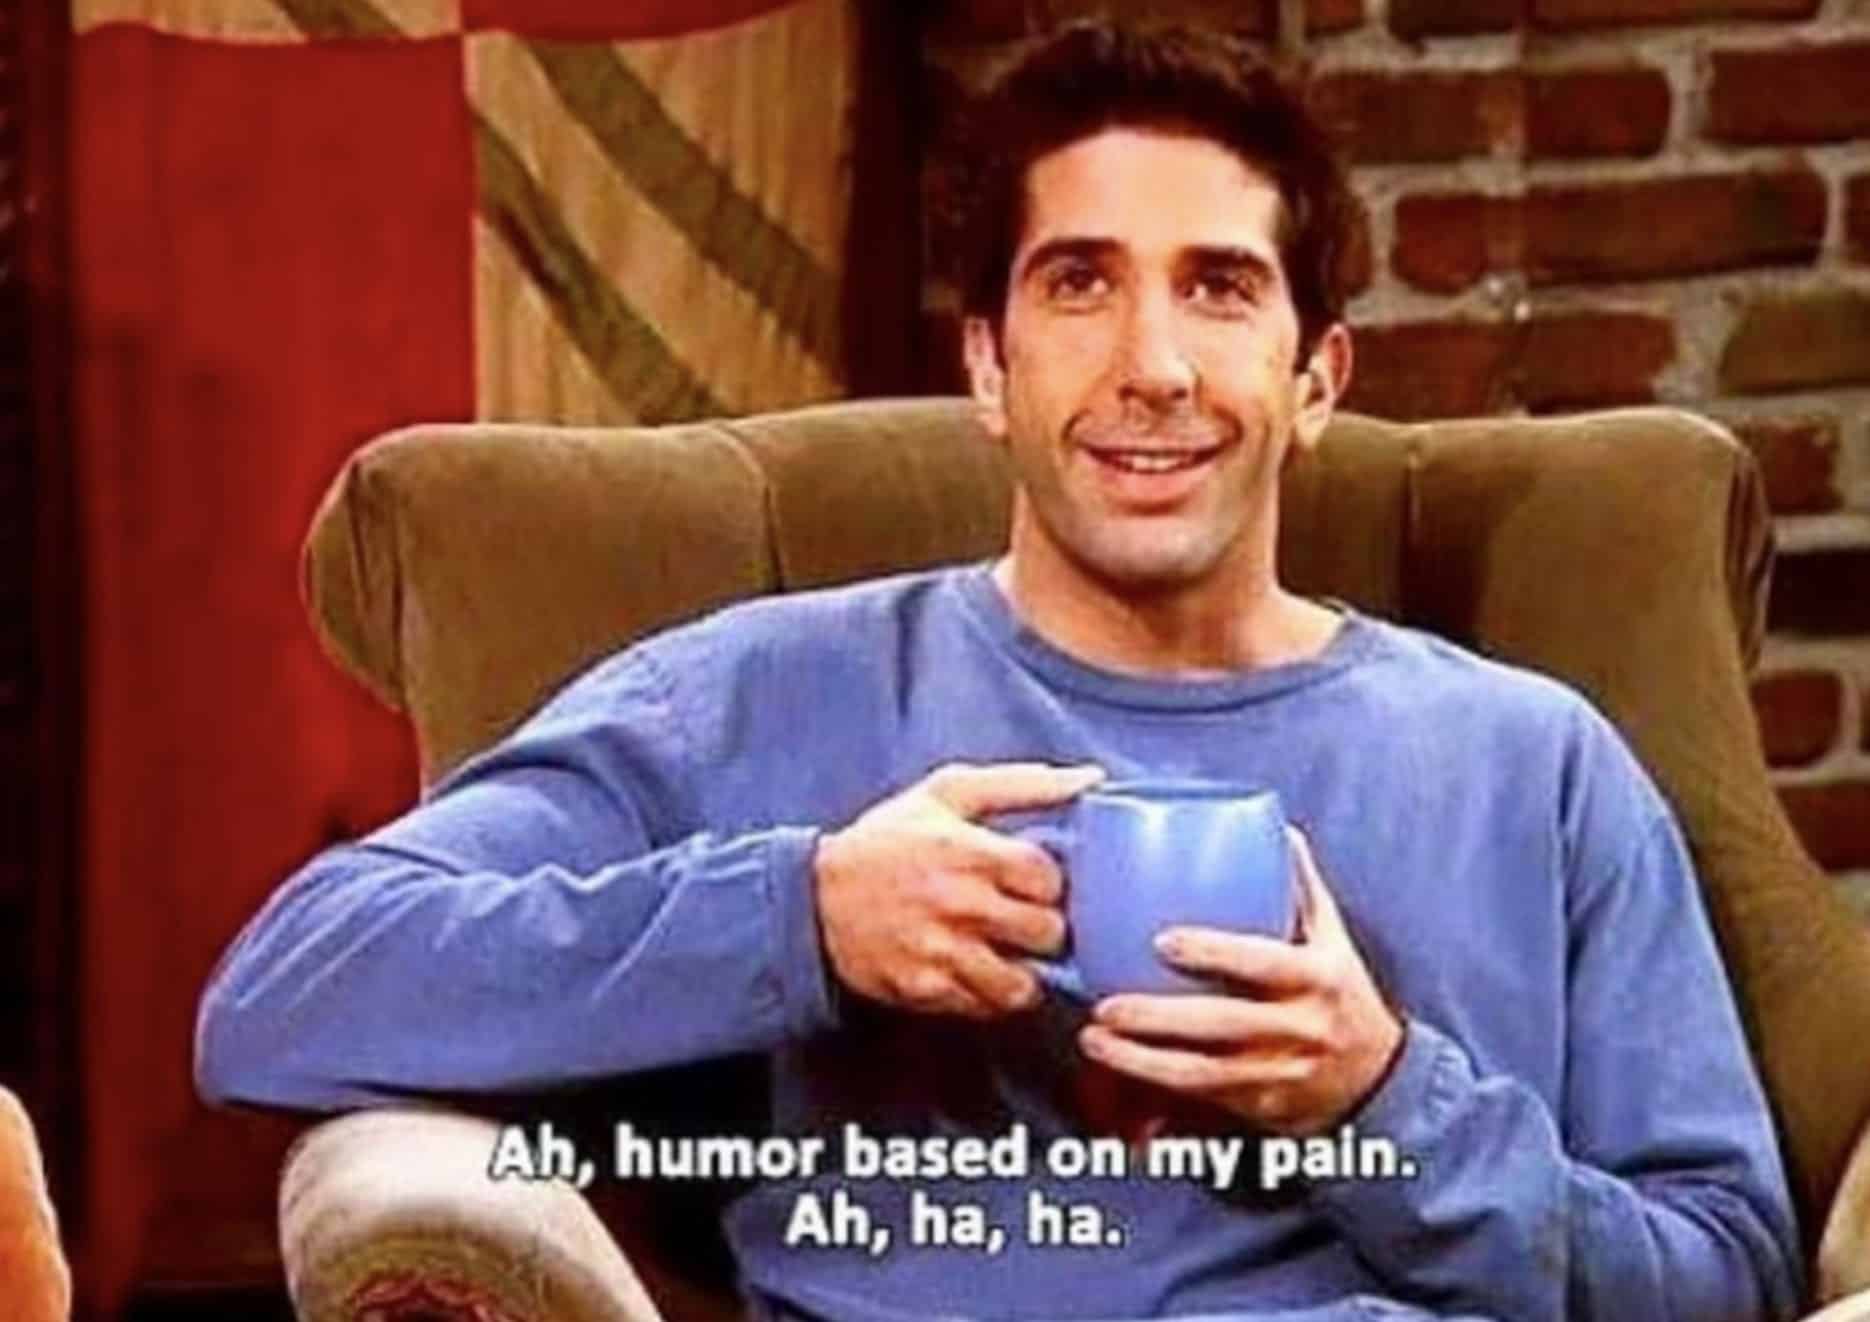 Ross from friends with text that says humor based on my pain